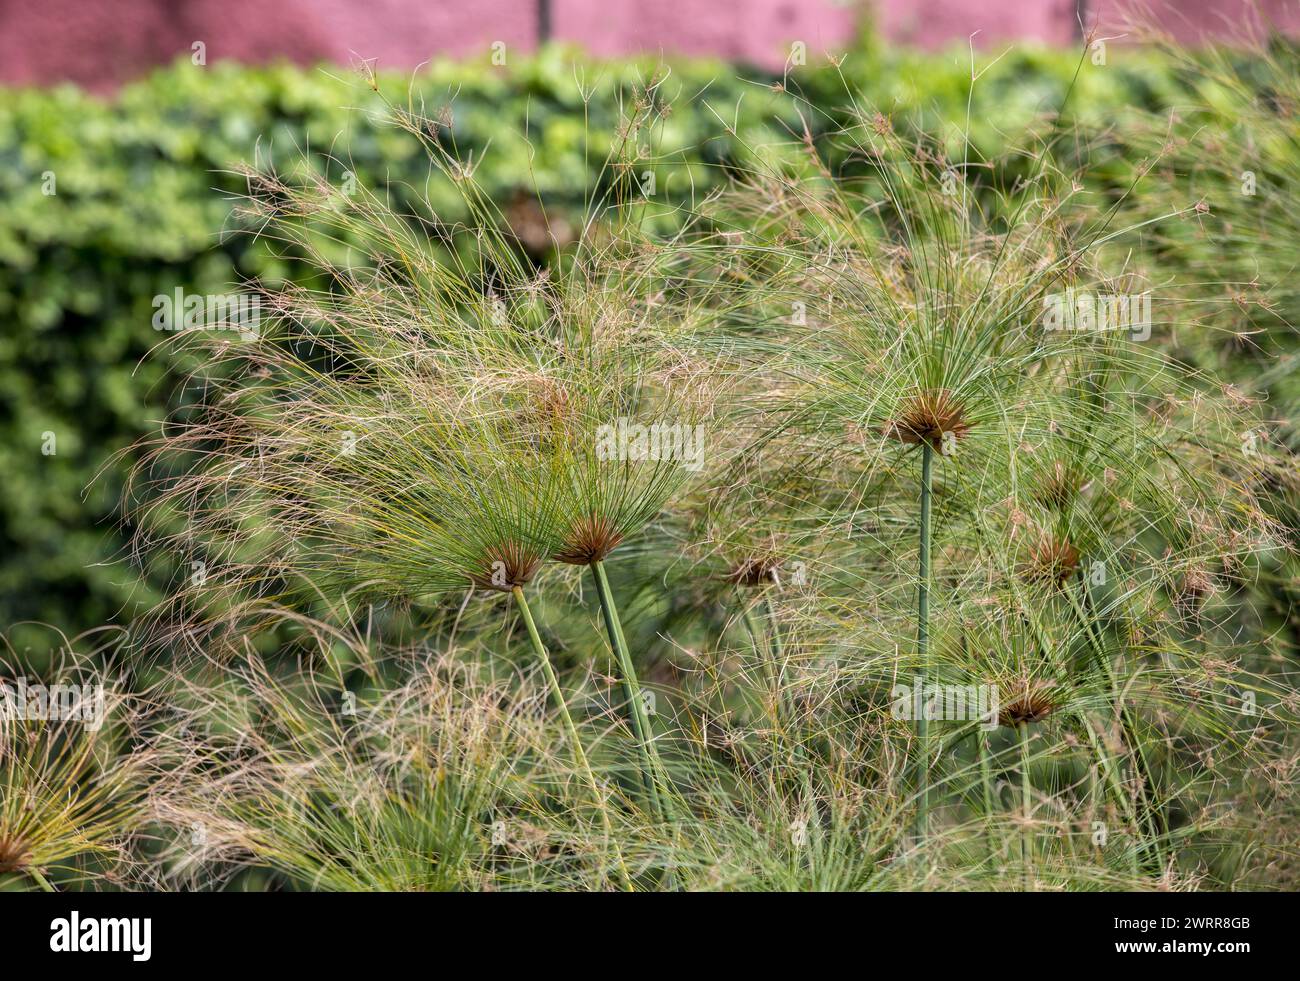 Egyptian papyrus (Cyperus papyrus L.) in garden Stock Photo